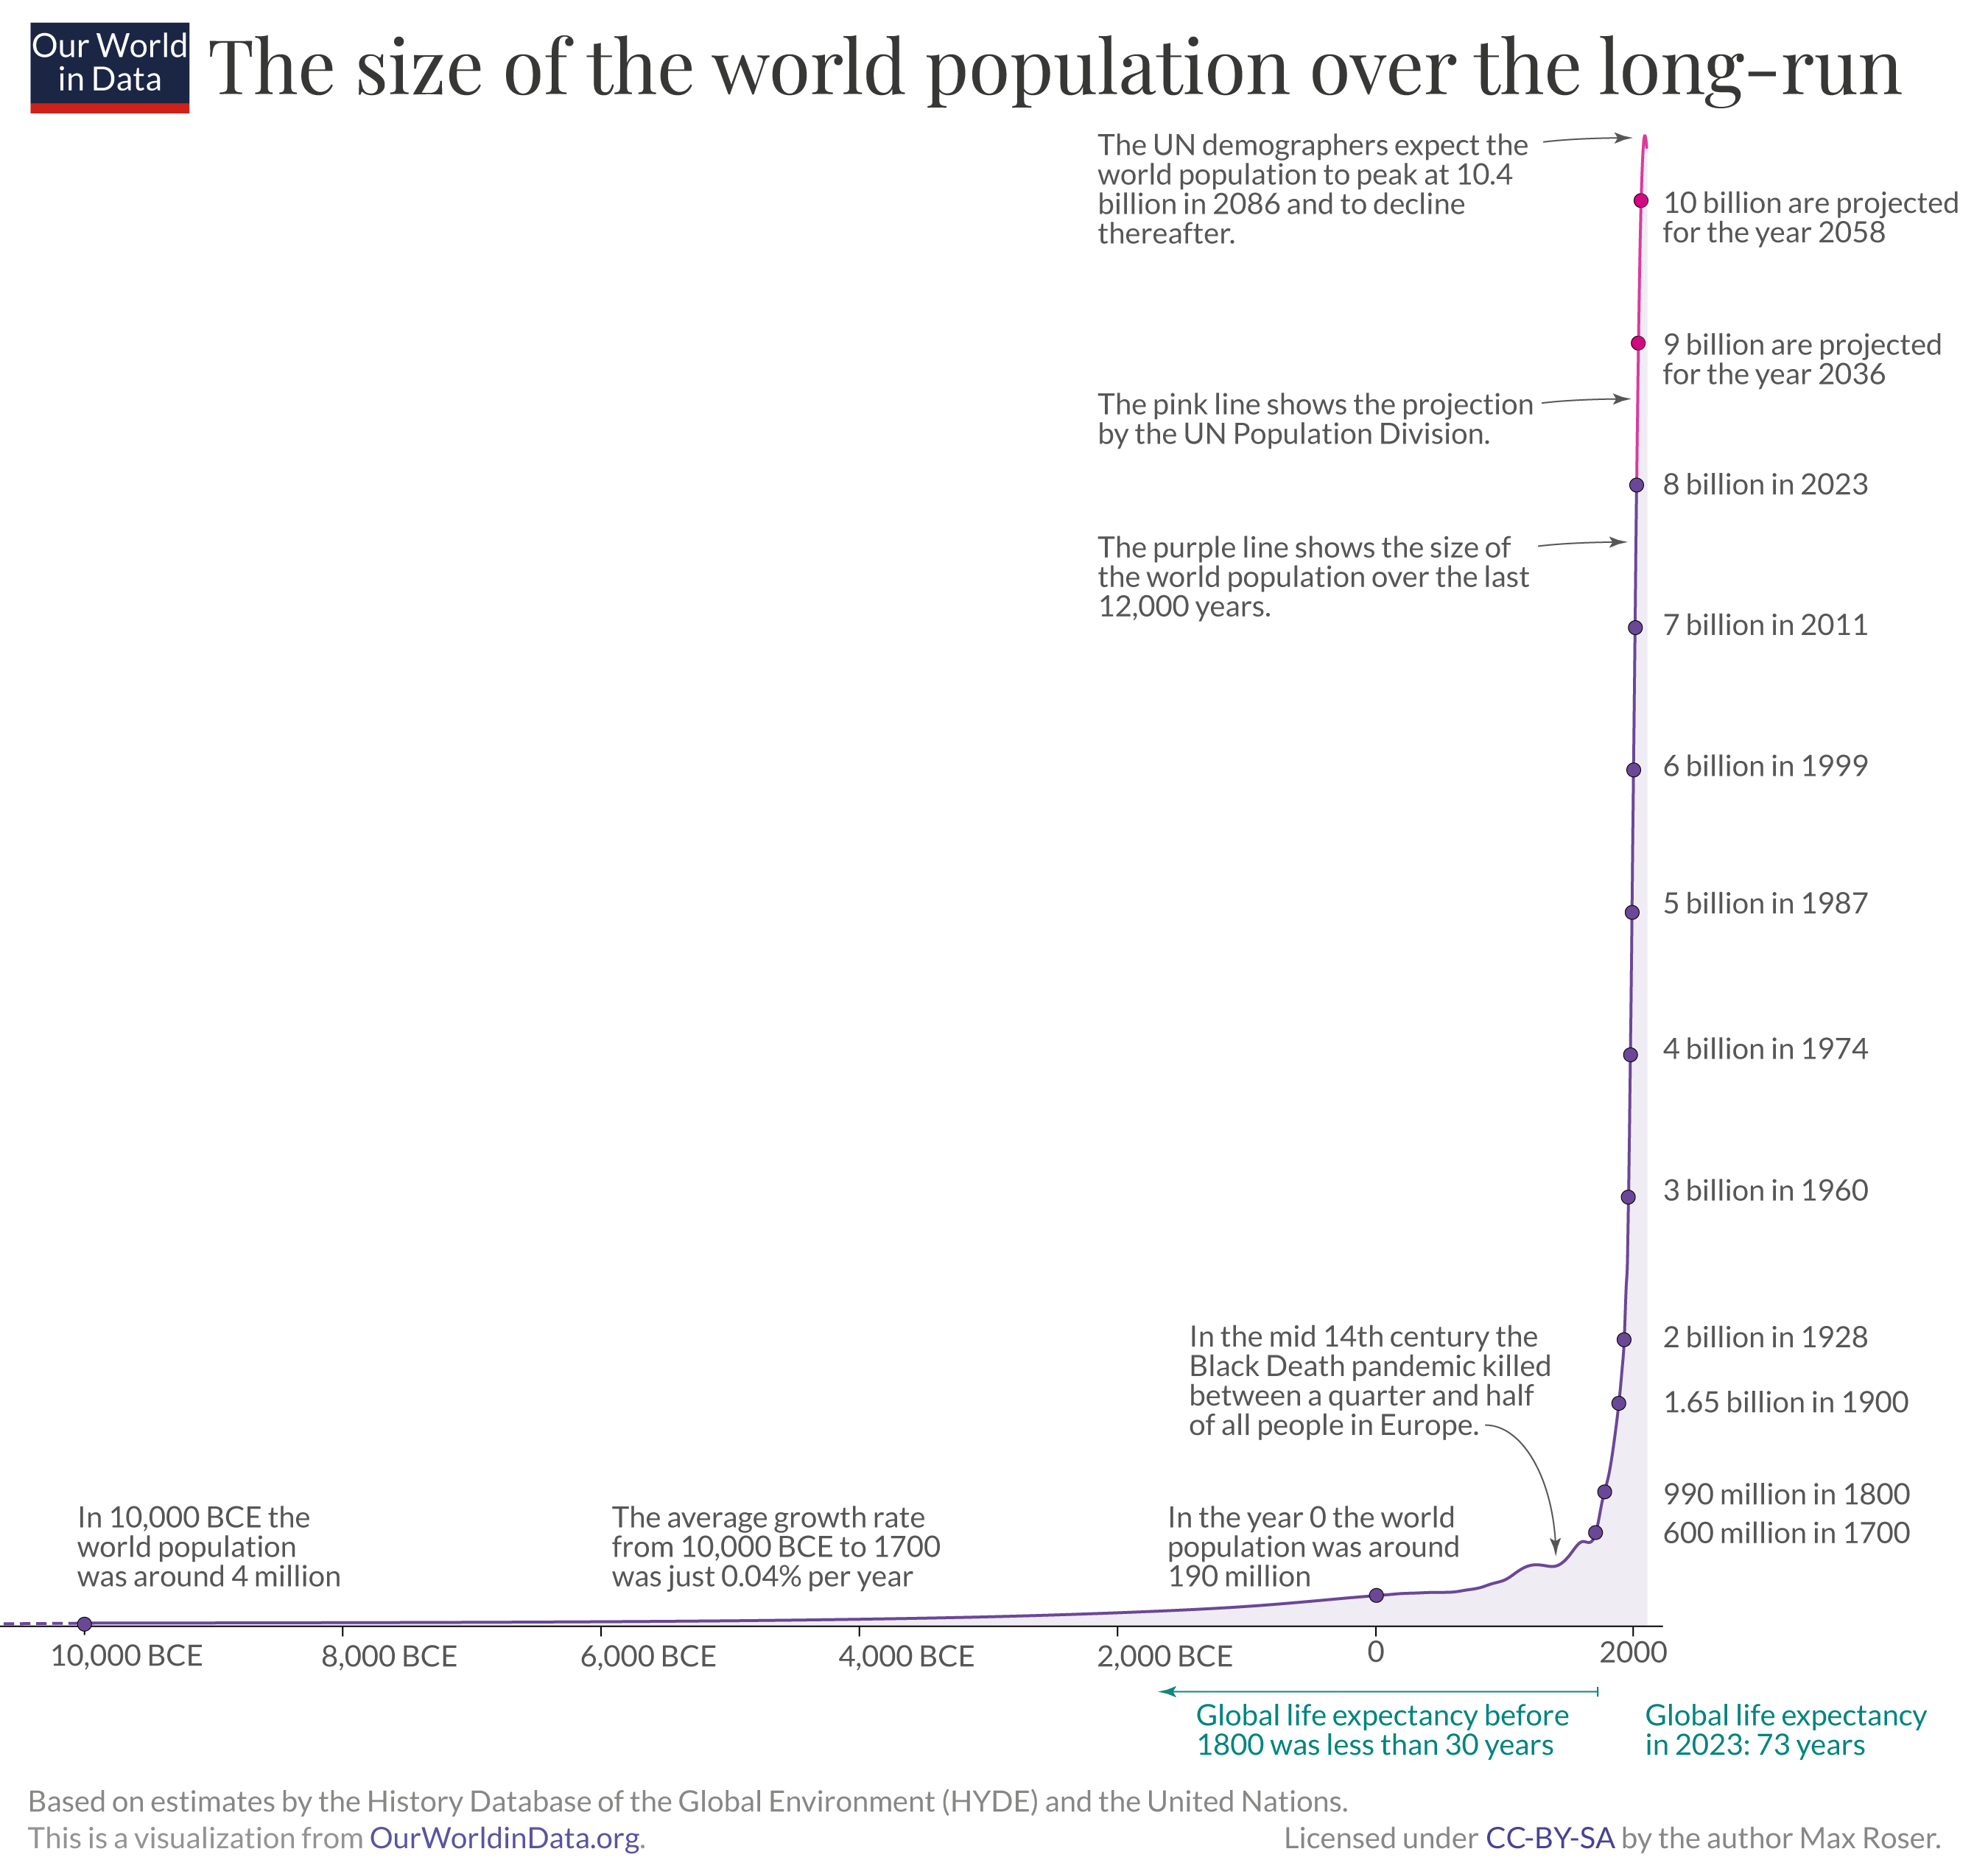 A graph shows the expontential growth of the world population from 10,000 BCE to 2000, where the population starts at around 4 million in 10,000 BCE, rises slowly to 190 million at year zero, then rises rapidly to 8 billion in 2023 and a projected population of 10 billion by 2058.